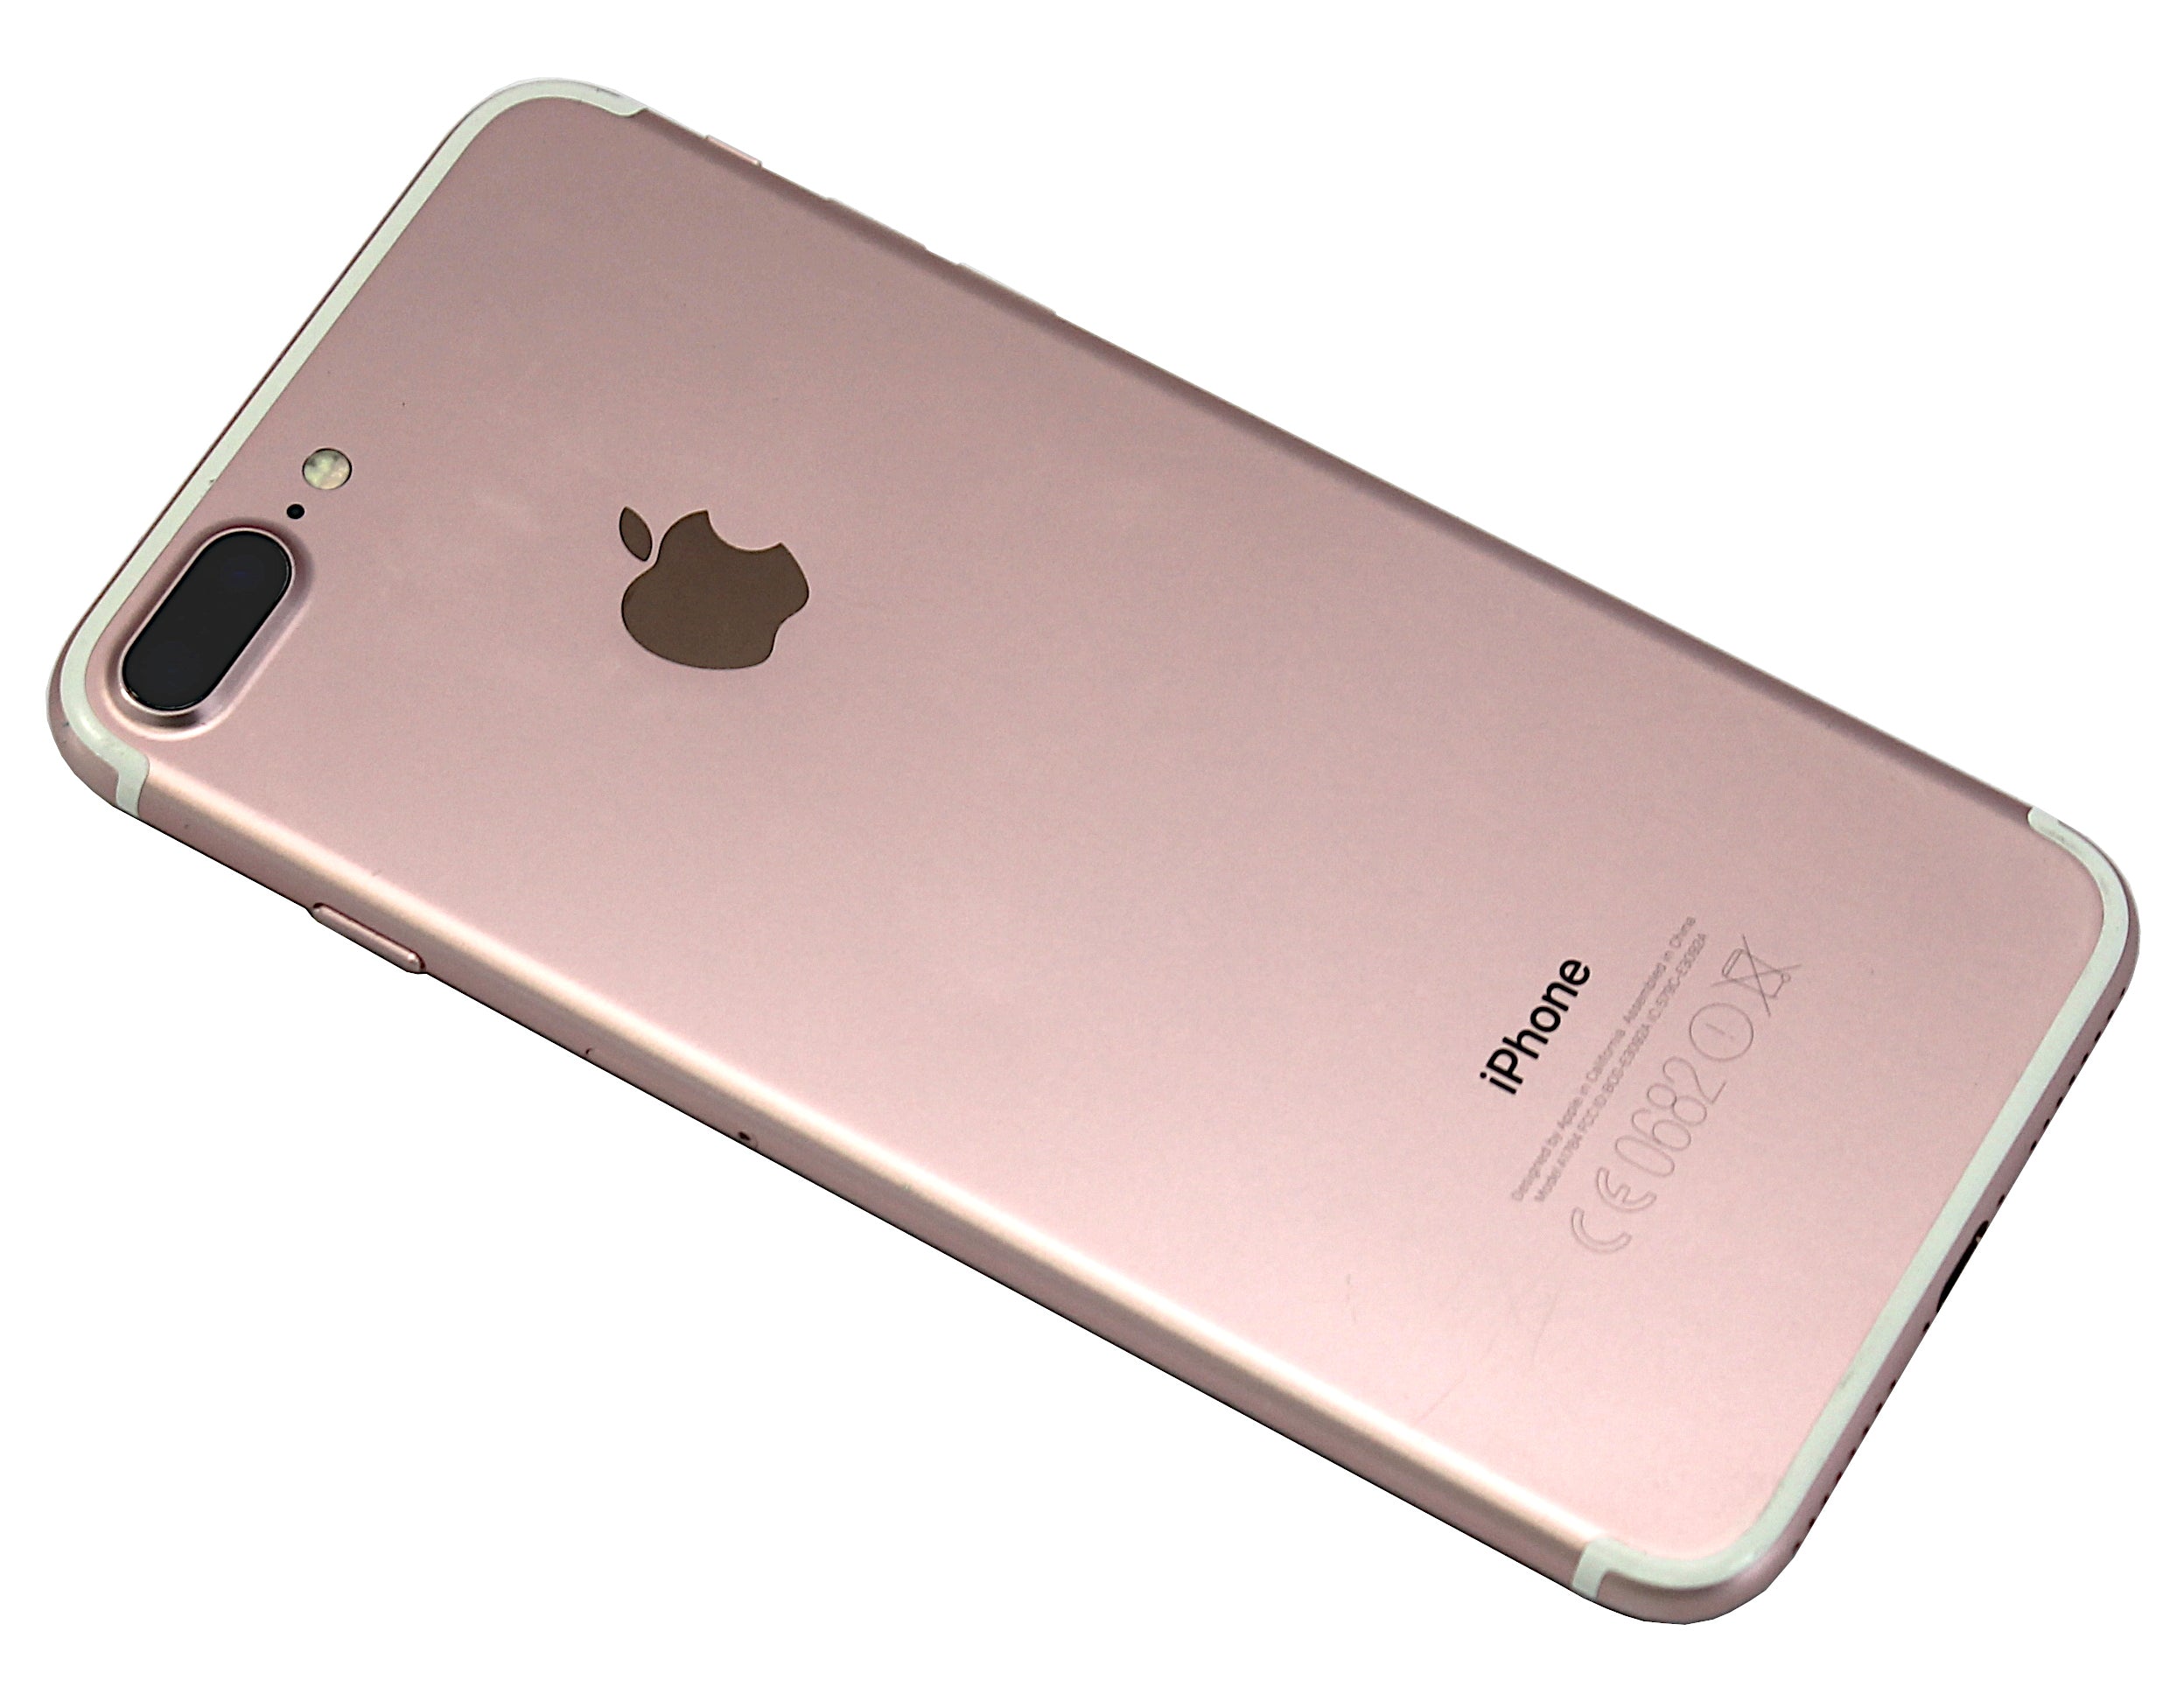 Apple iPhone 7 Plus Smartphone, 128GB, Network Unlocked, Rose Gold, A1784